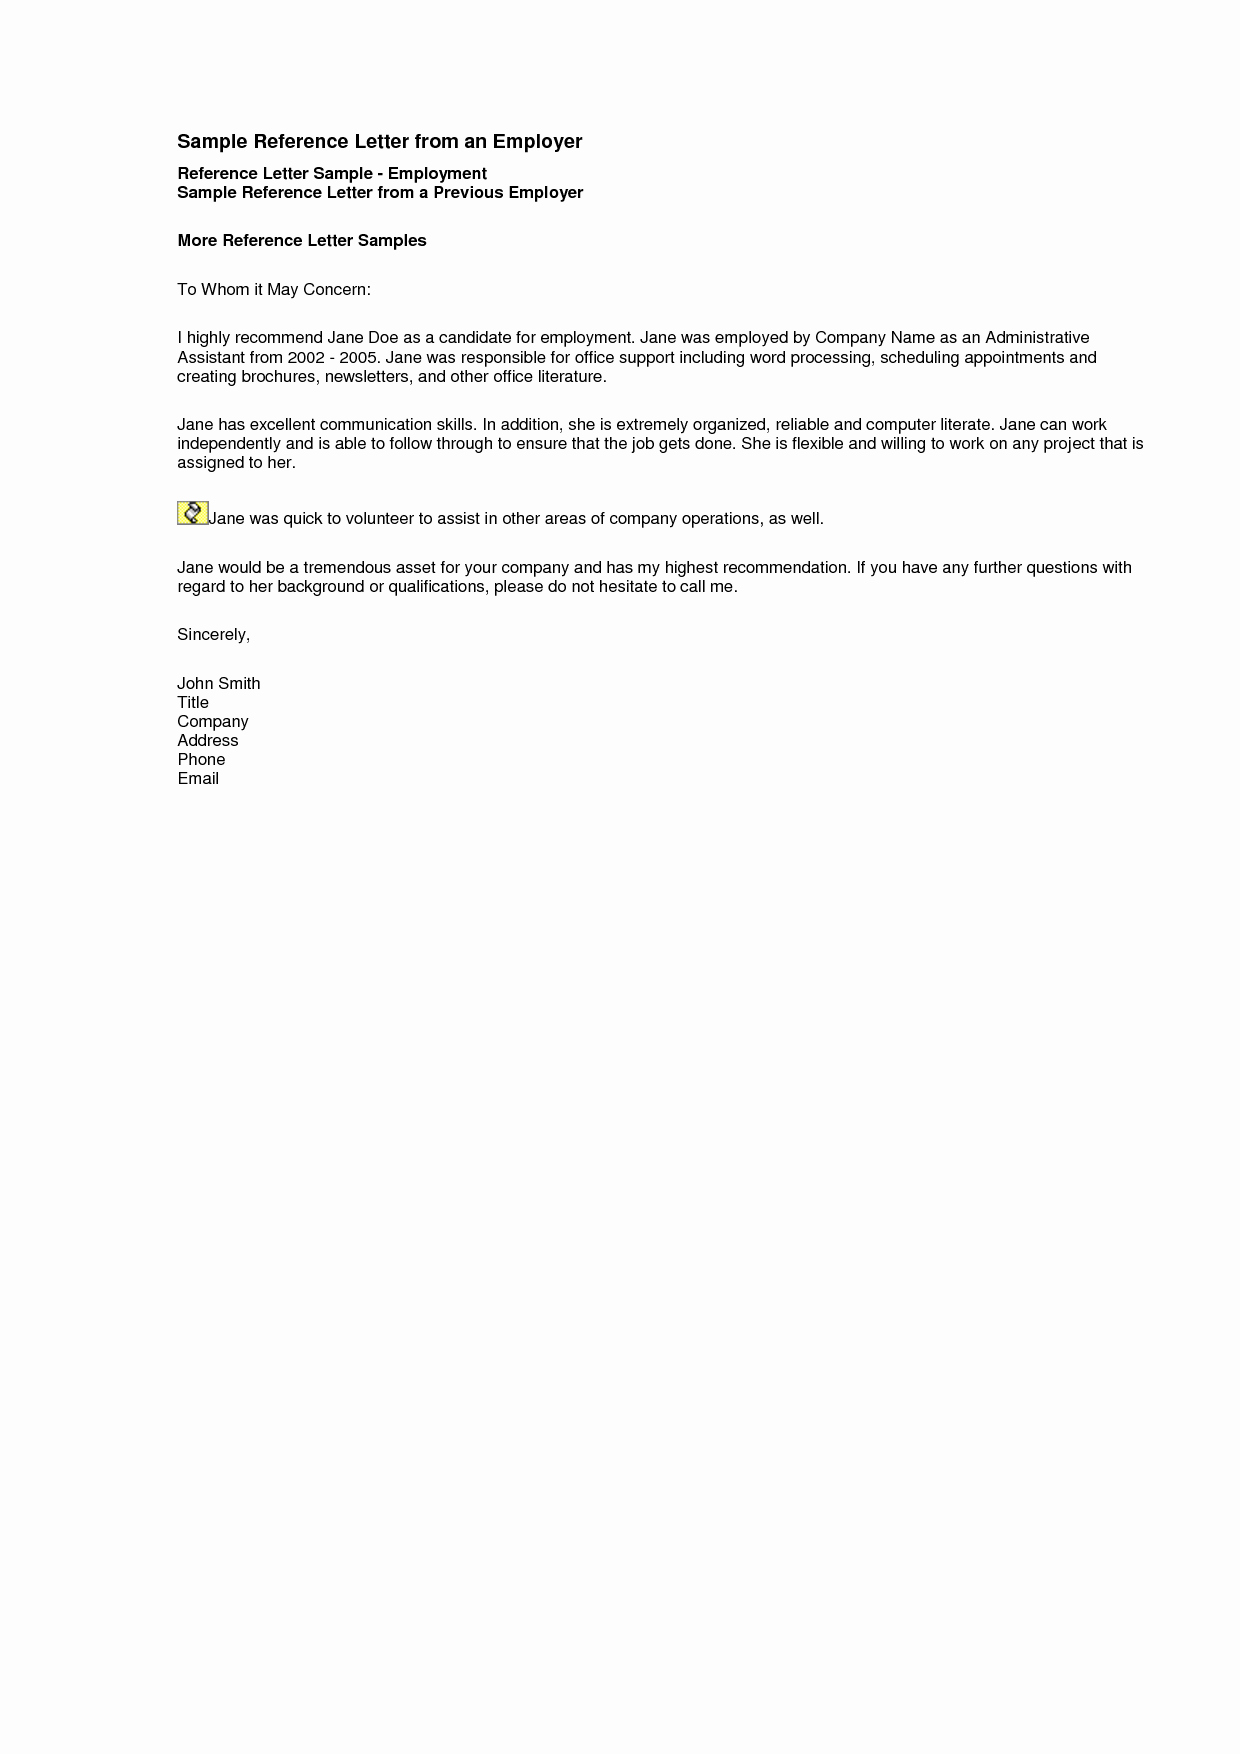 Samples Of Employee Reference Letters Unique Sample Reference Letter for Employment